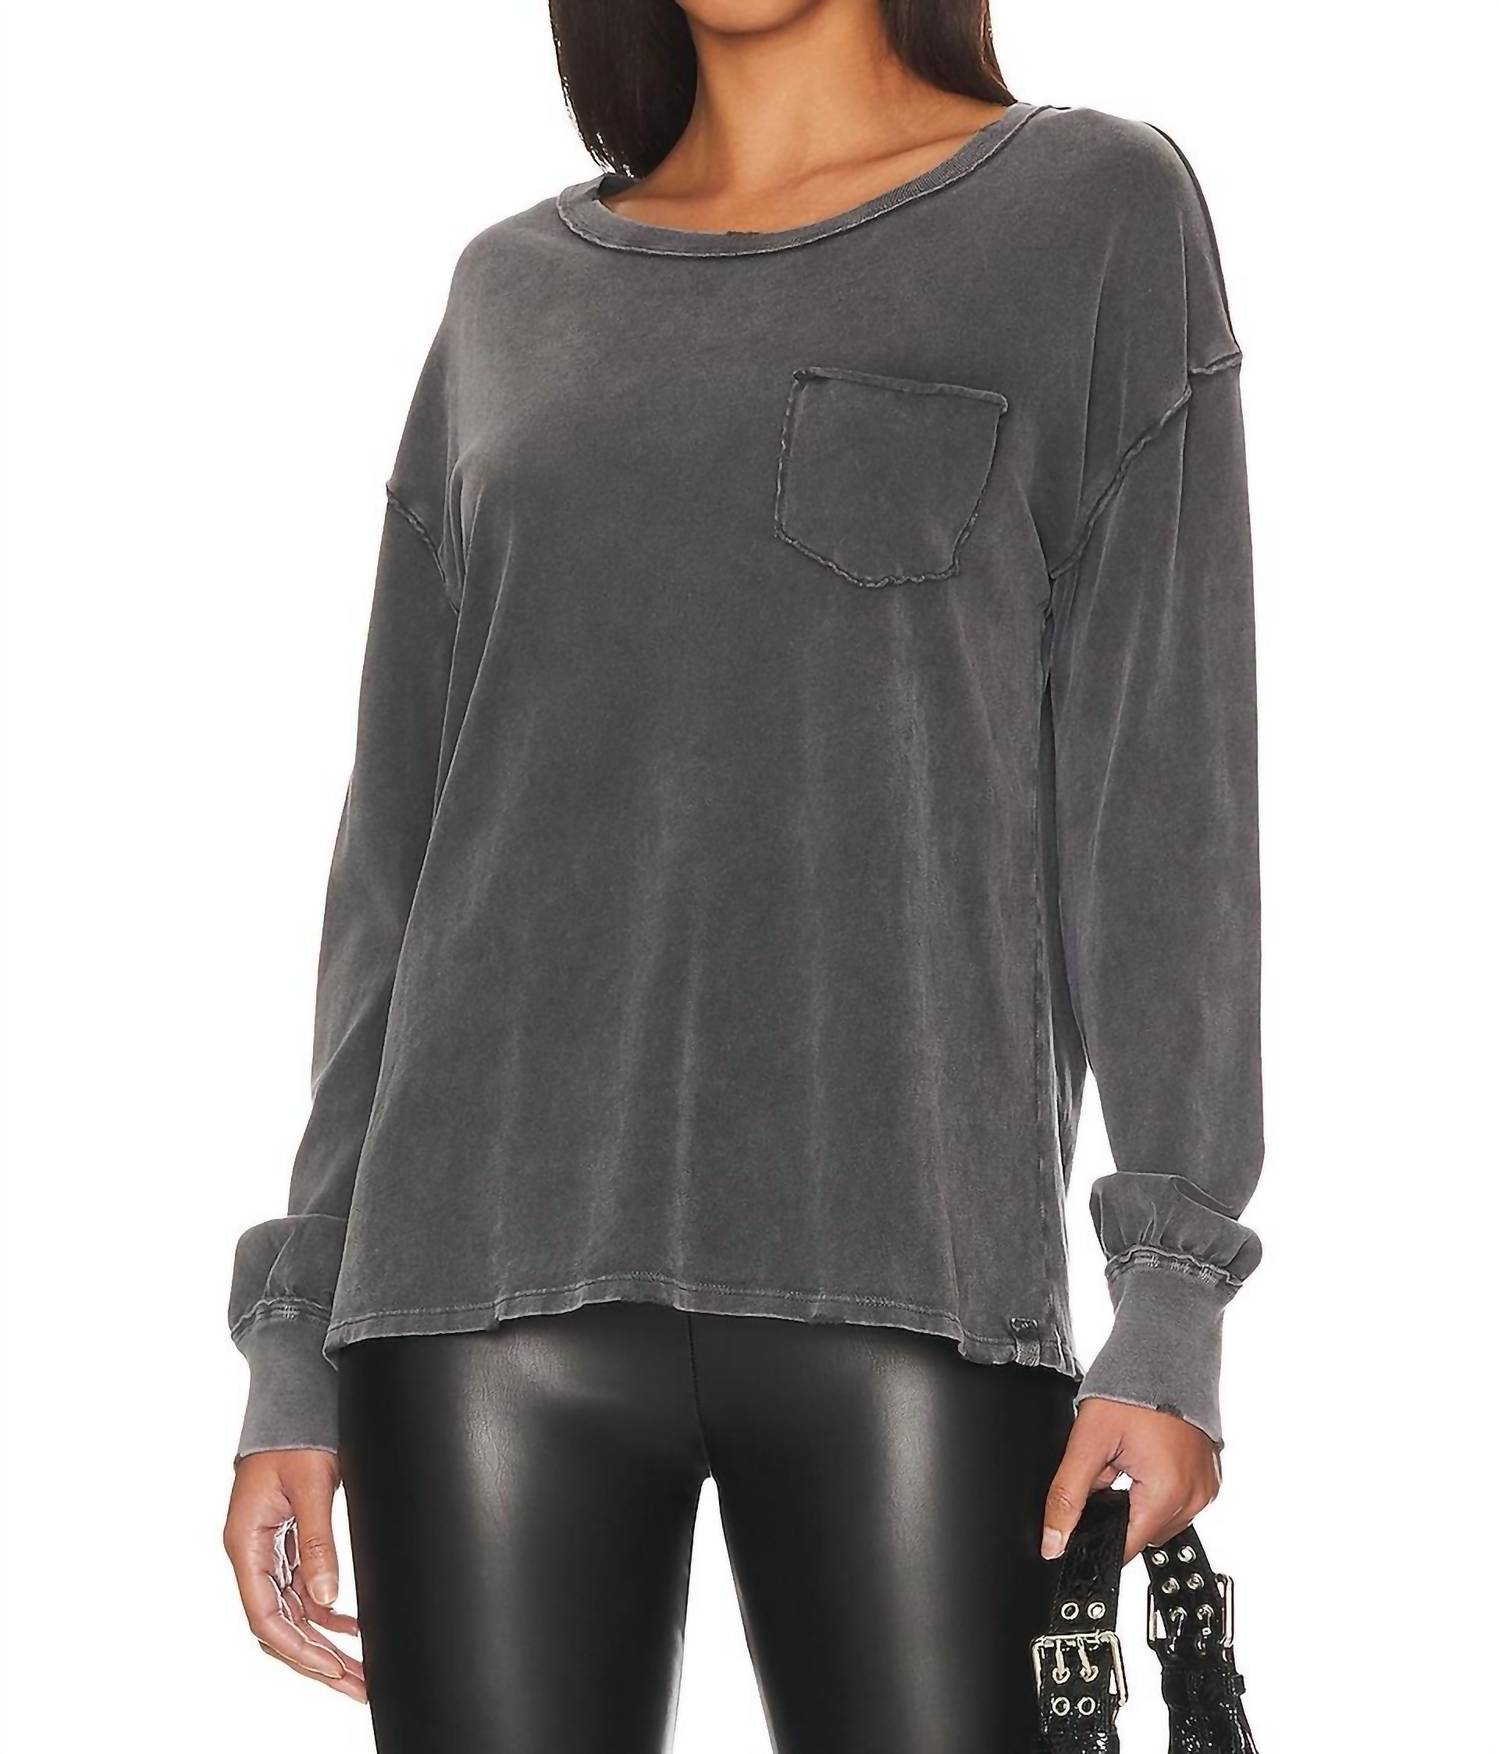 FREE PEOPLE Fade Into You Top in Metal Stiletto